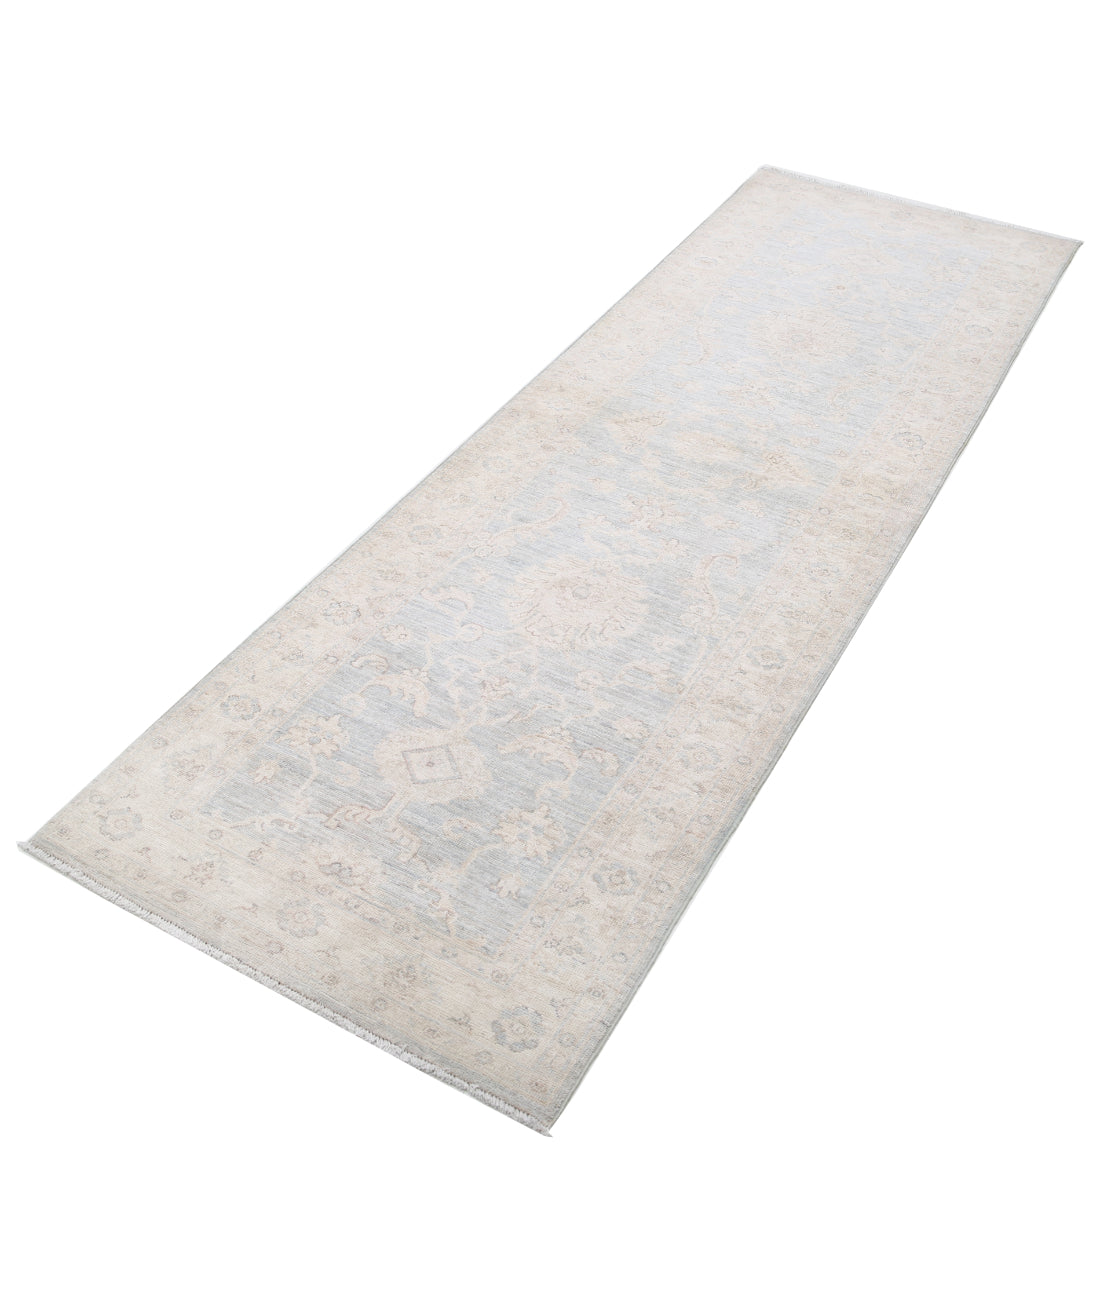 Hand Knotted Serenity Wool Rug - 2'8'' x 6'3'' 2'8'' x 6'3'' (80 X 188) / Grey / Ivory